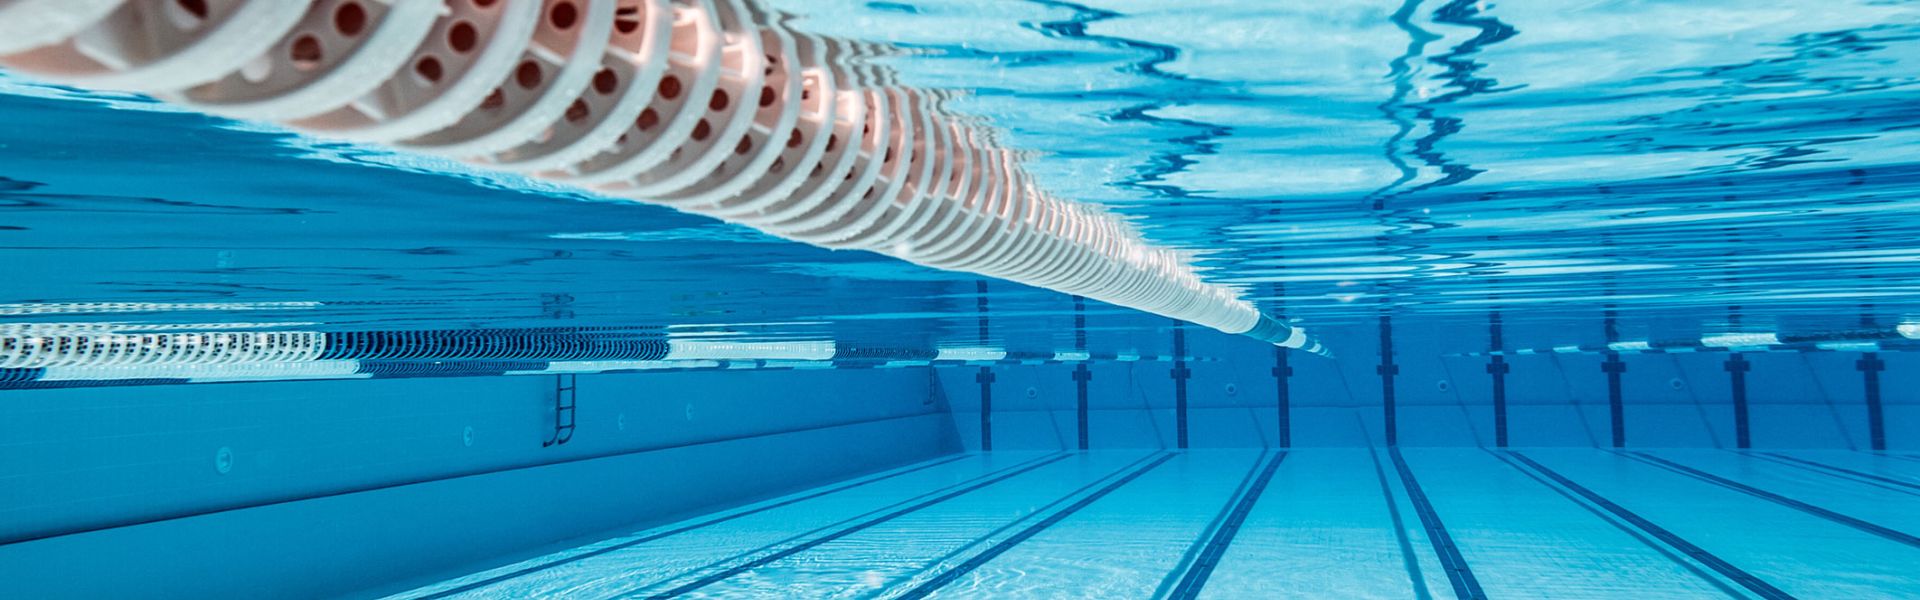 Swimming pools vs. wild swimming – a germs expert on which is